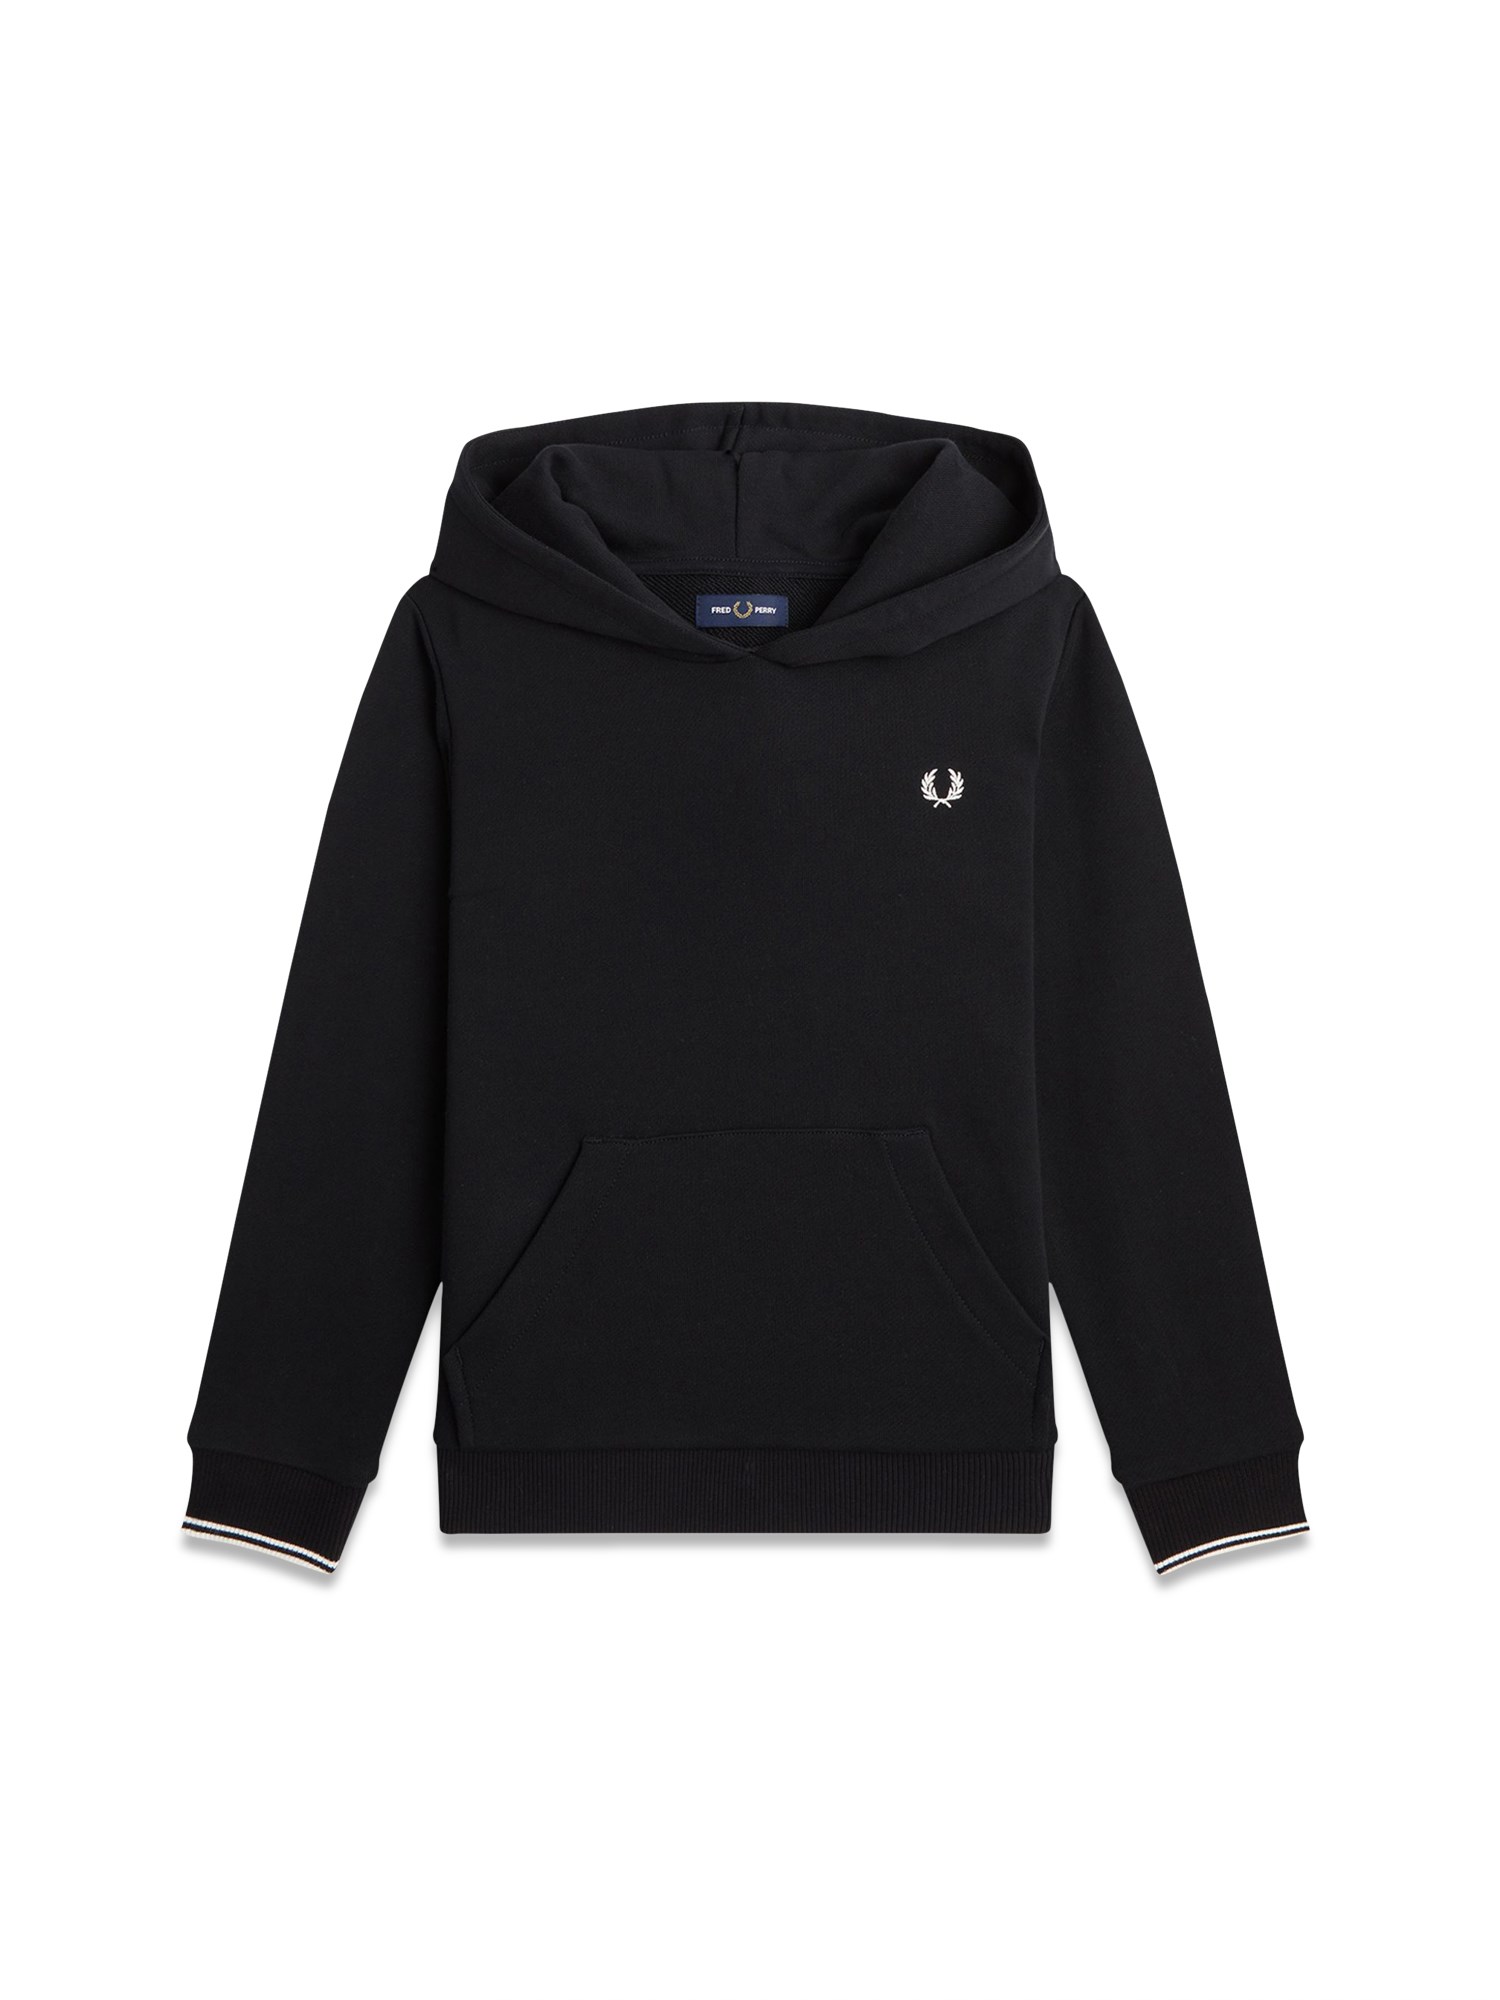 fred perry tipped hooded sweatshirt